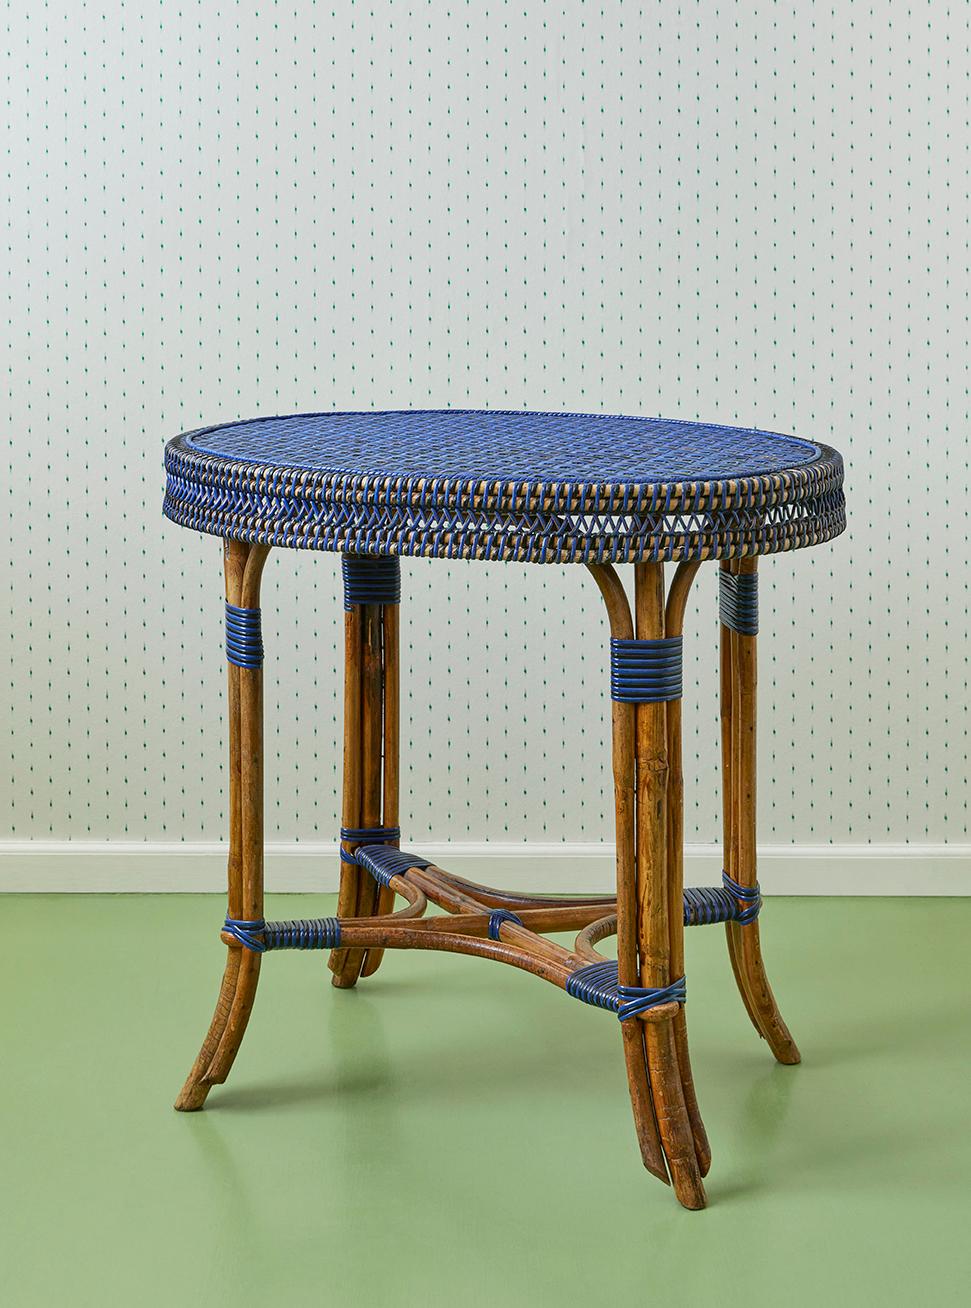 France, early 20th Century

Table in blue and black rattan. 

H 70 x W 55 x D 75 cm